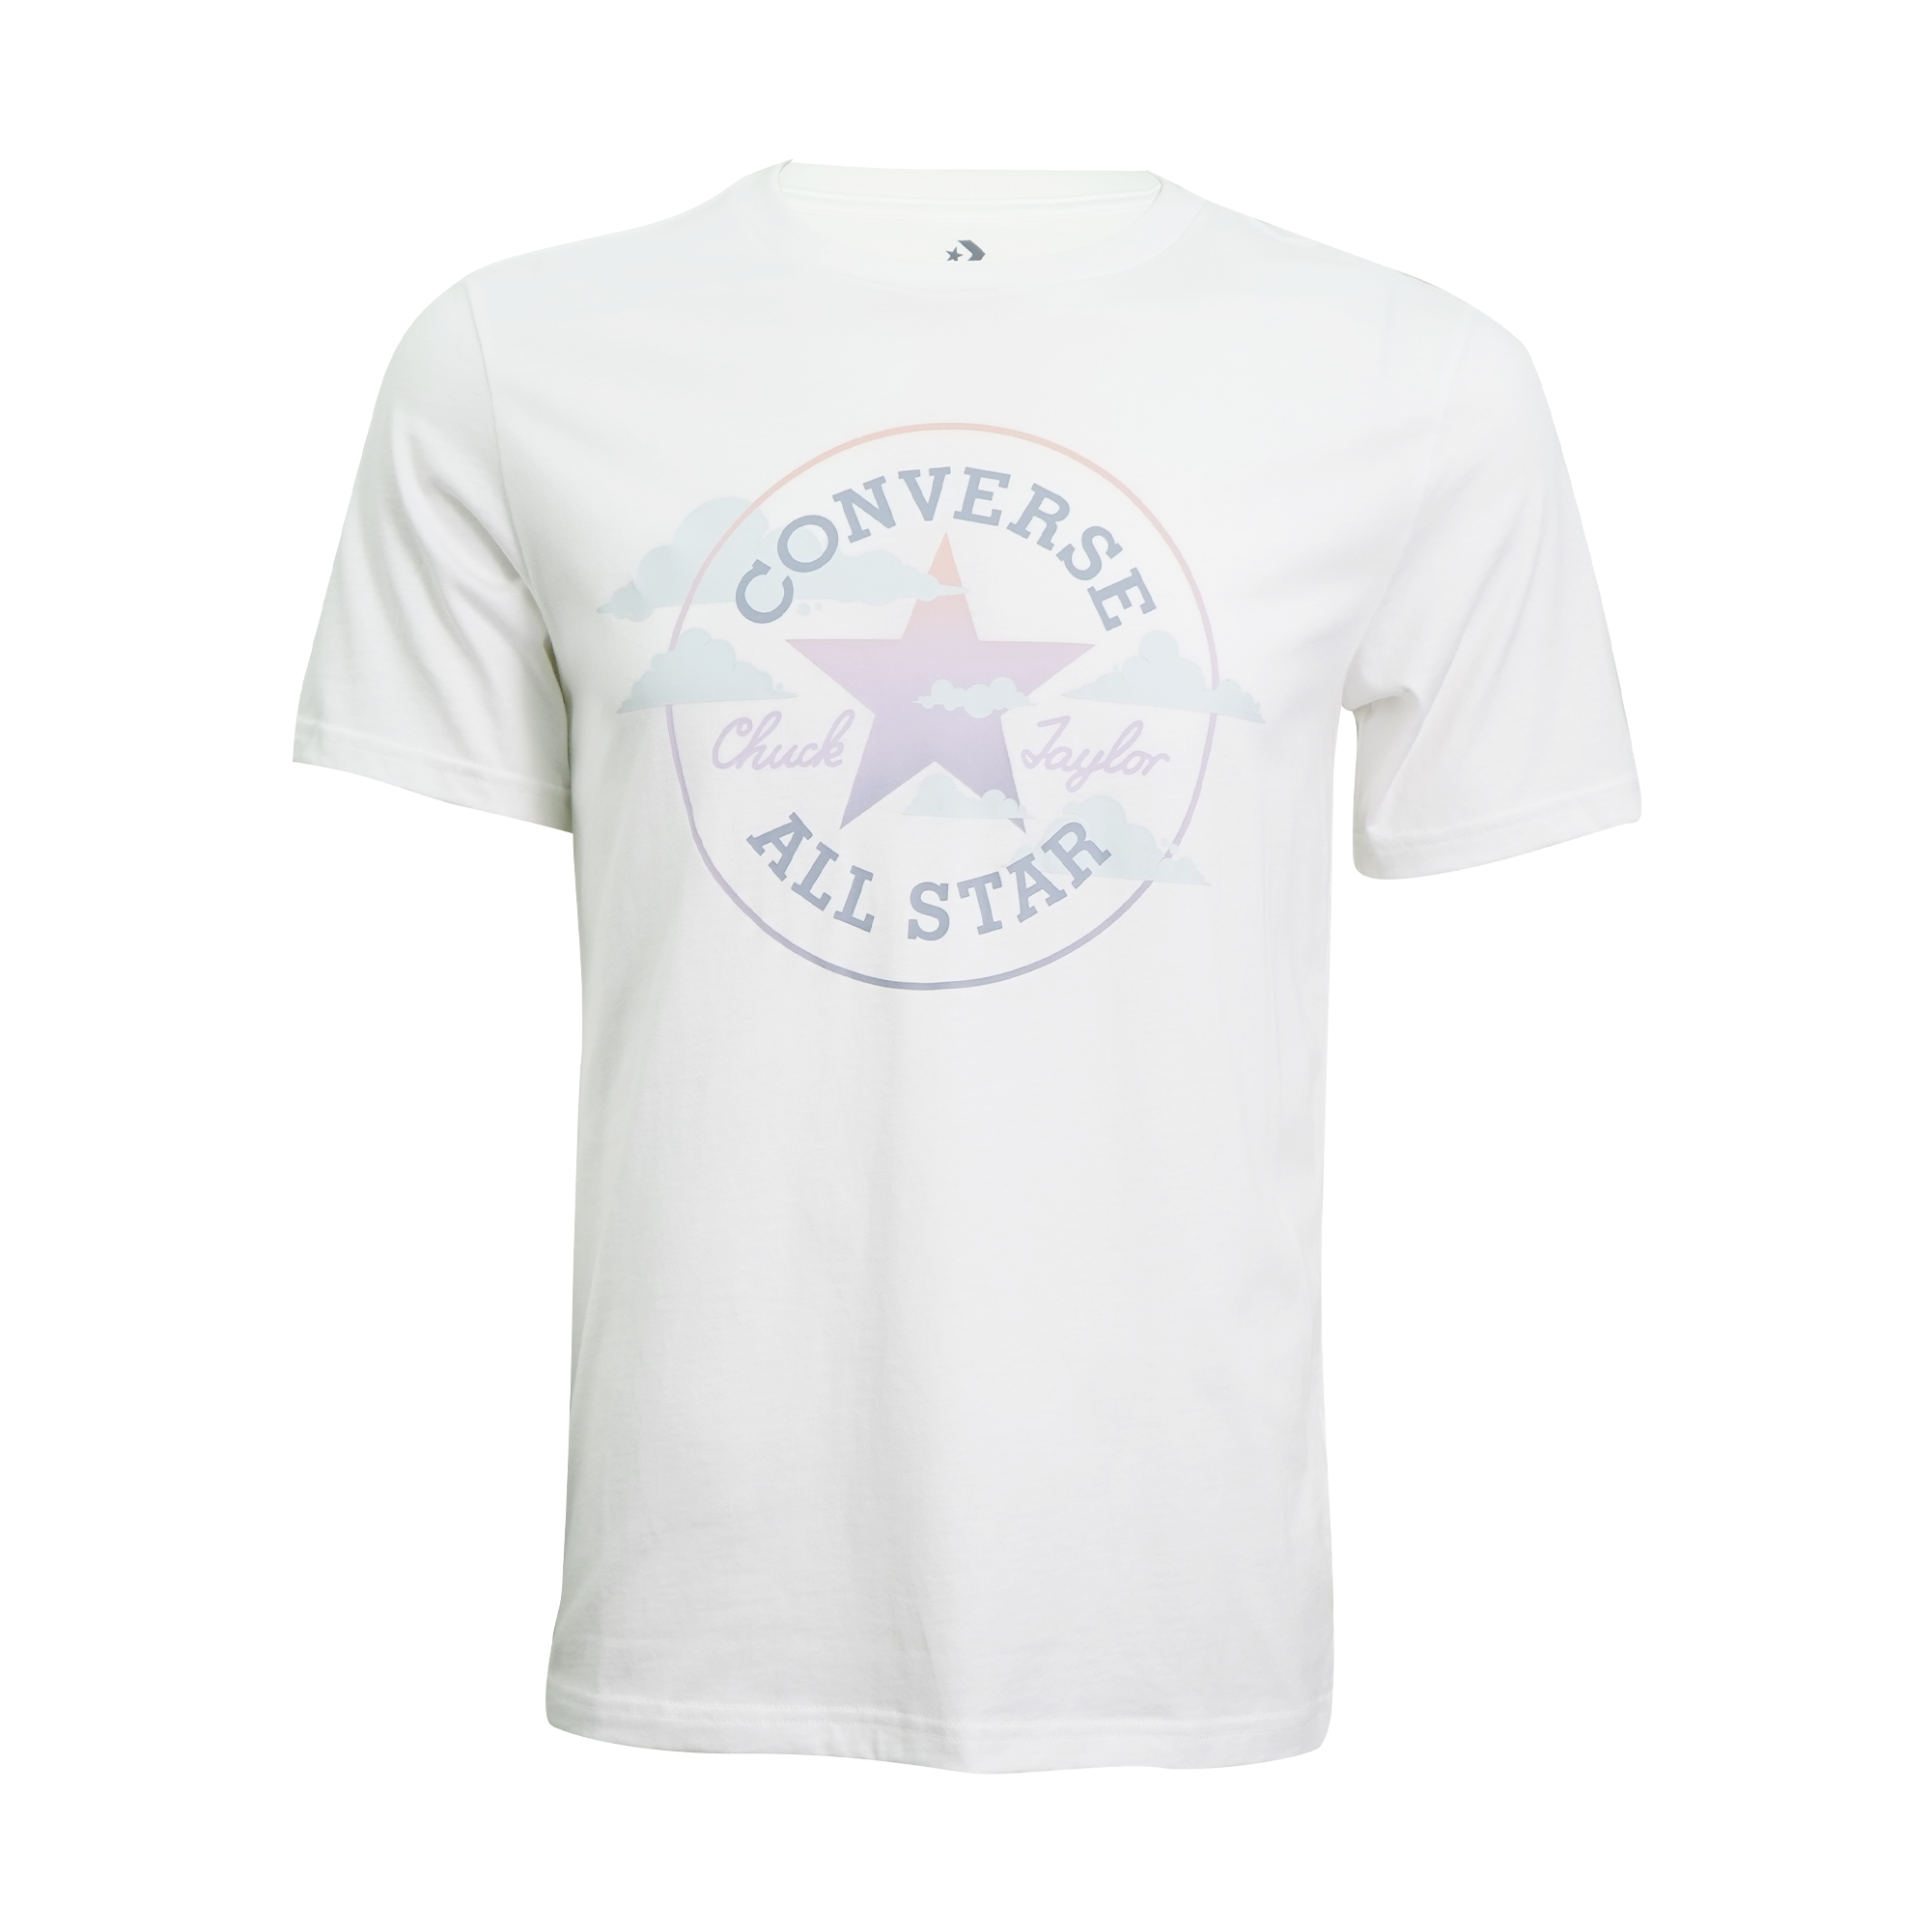 STAR CHEVRON By Converse CLOUDS TEE BLACK GRAPHIC Culture – Fit